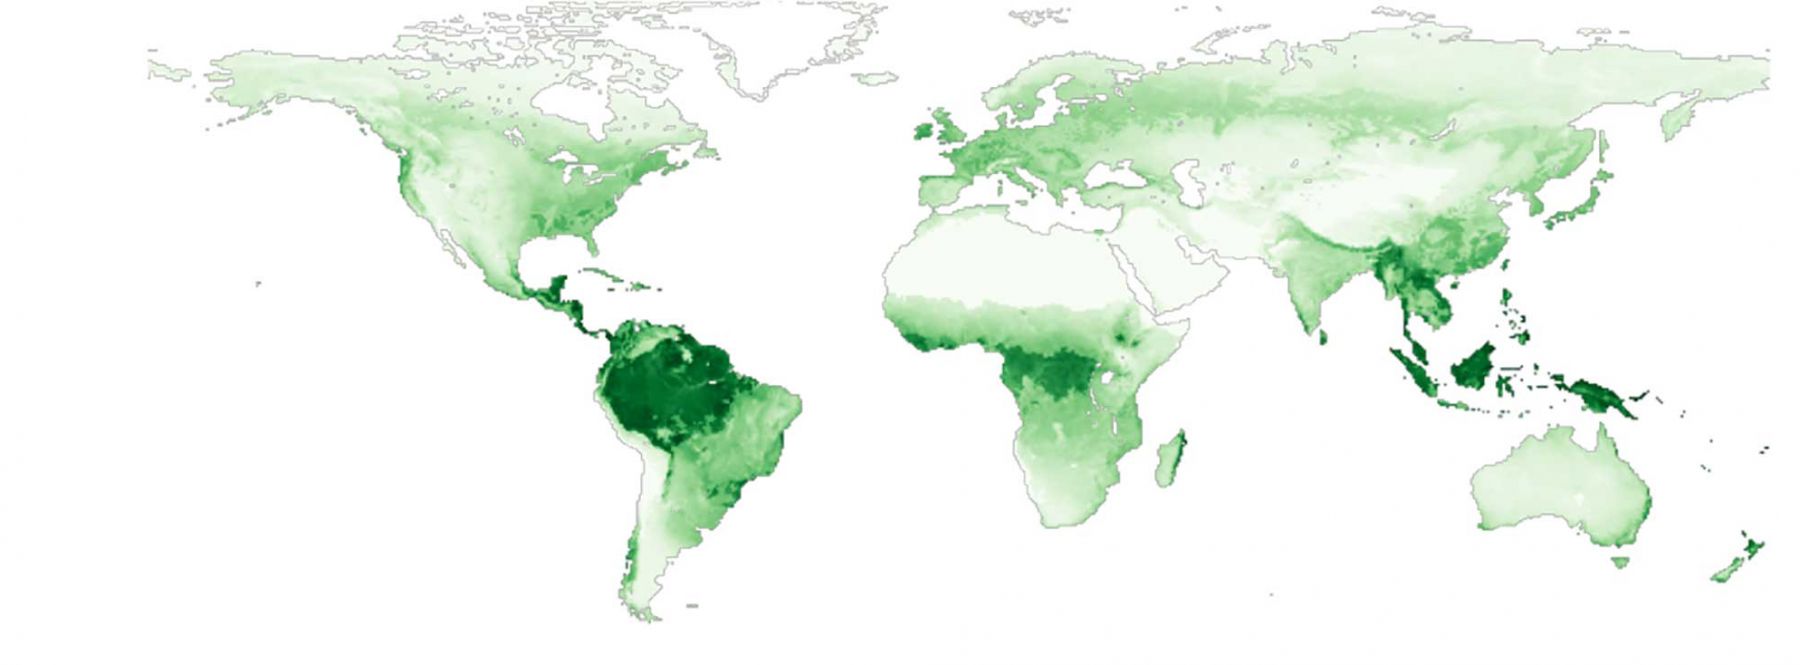 Distribution of global photosynthesis from remote sensing.